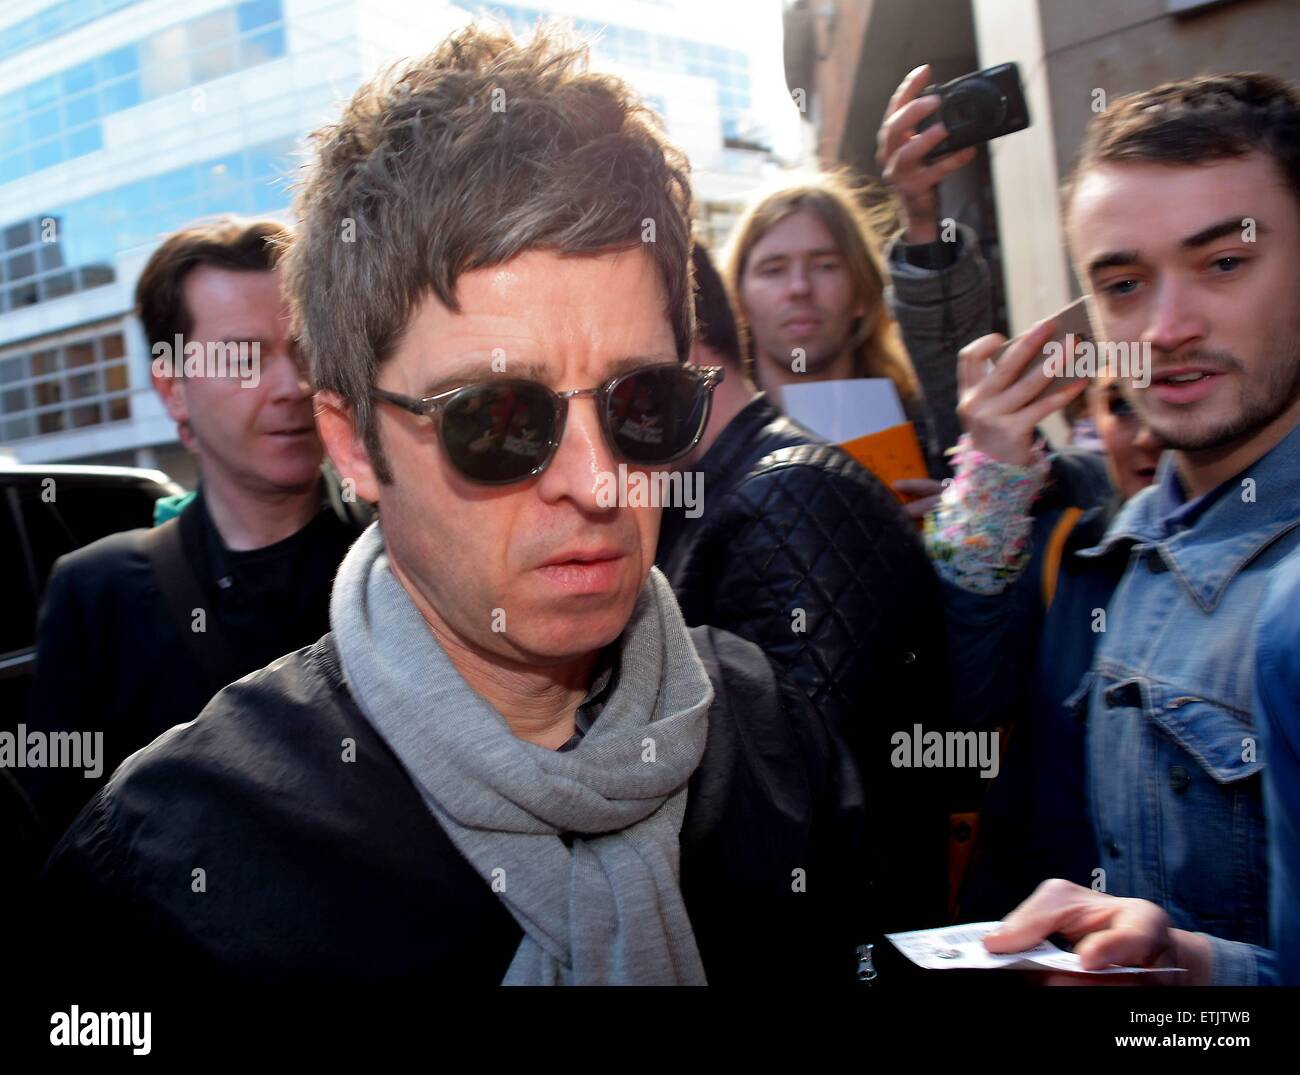 Noel Gallagher at Today FM & FM104 radio stations today ahead of his gig at  3Arena